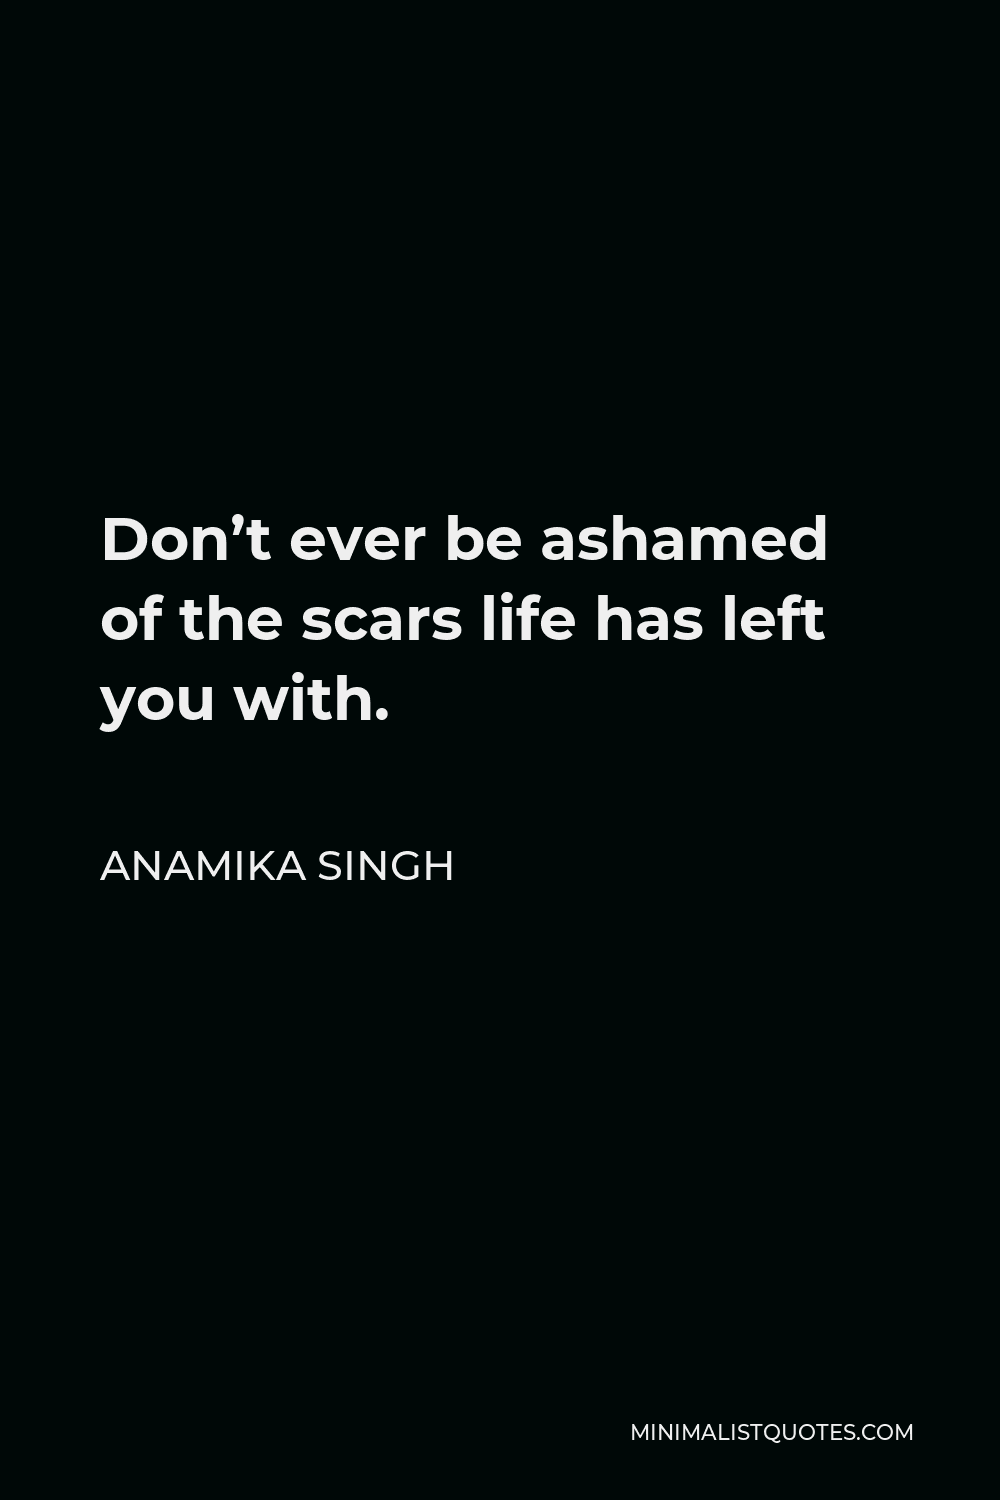 Anamika Singh Quote - Don’t ever be ashamed of the scars life has left you with.